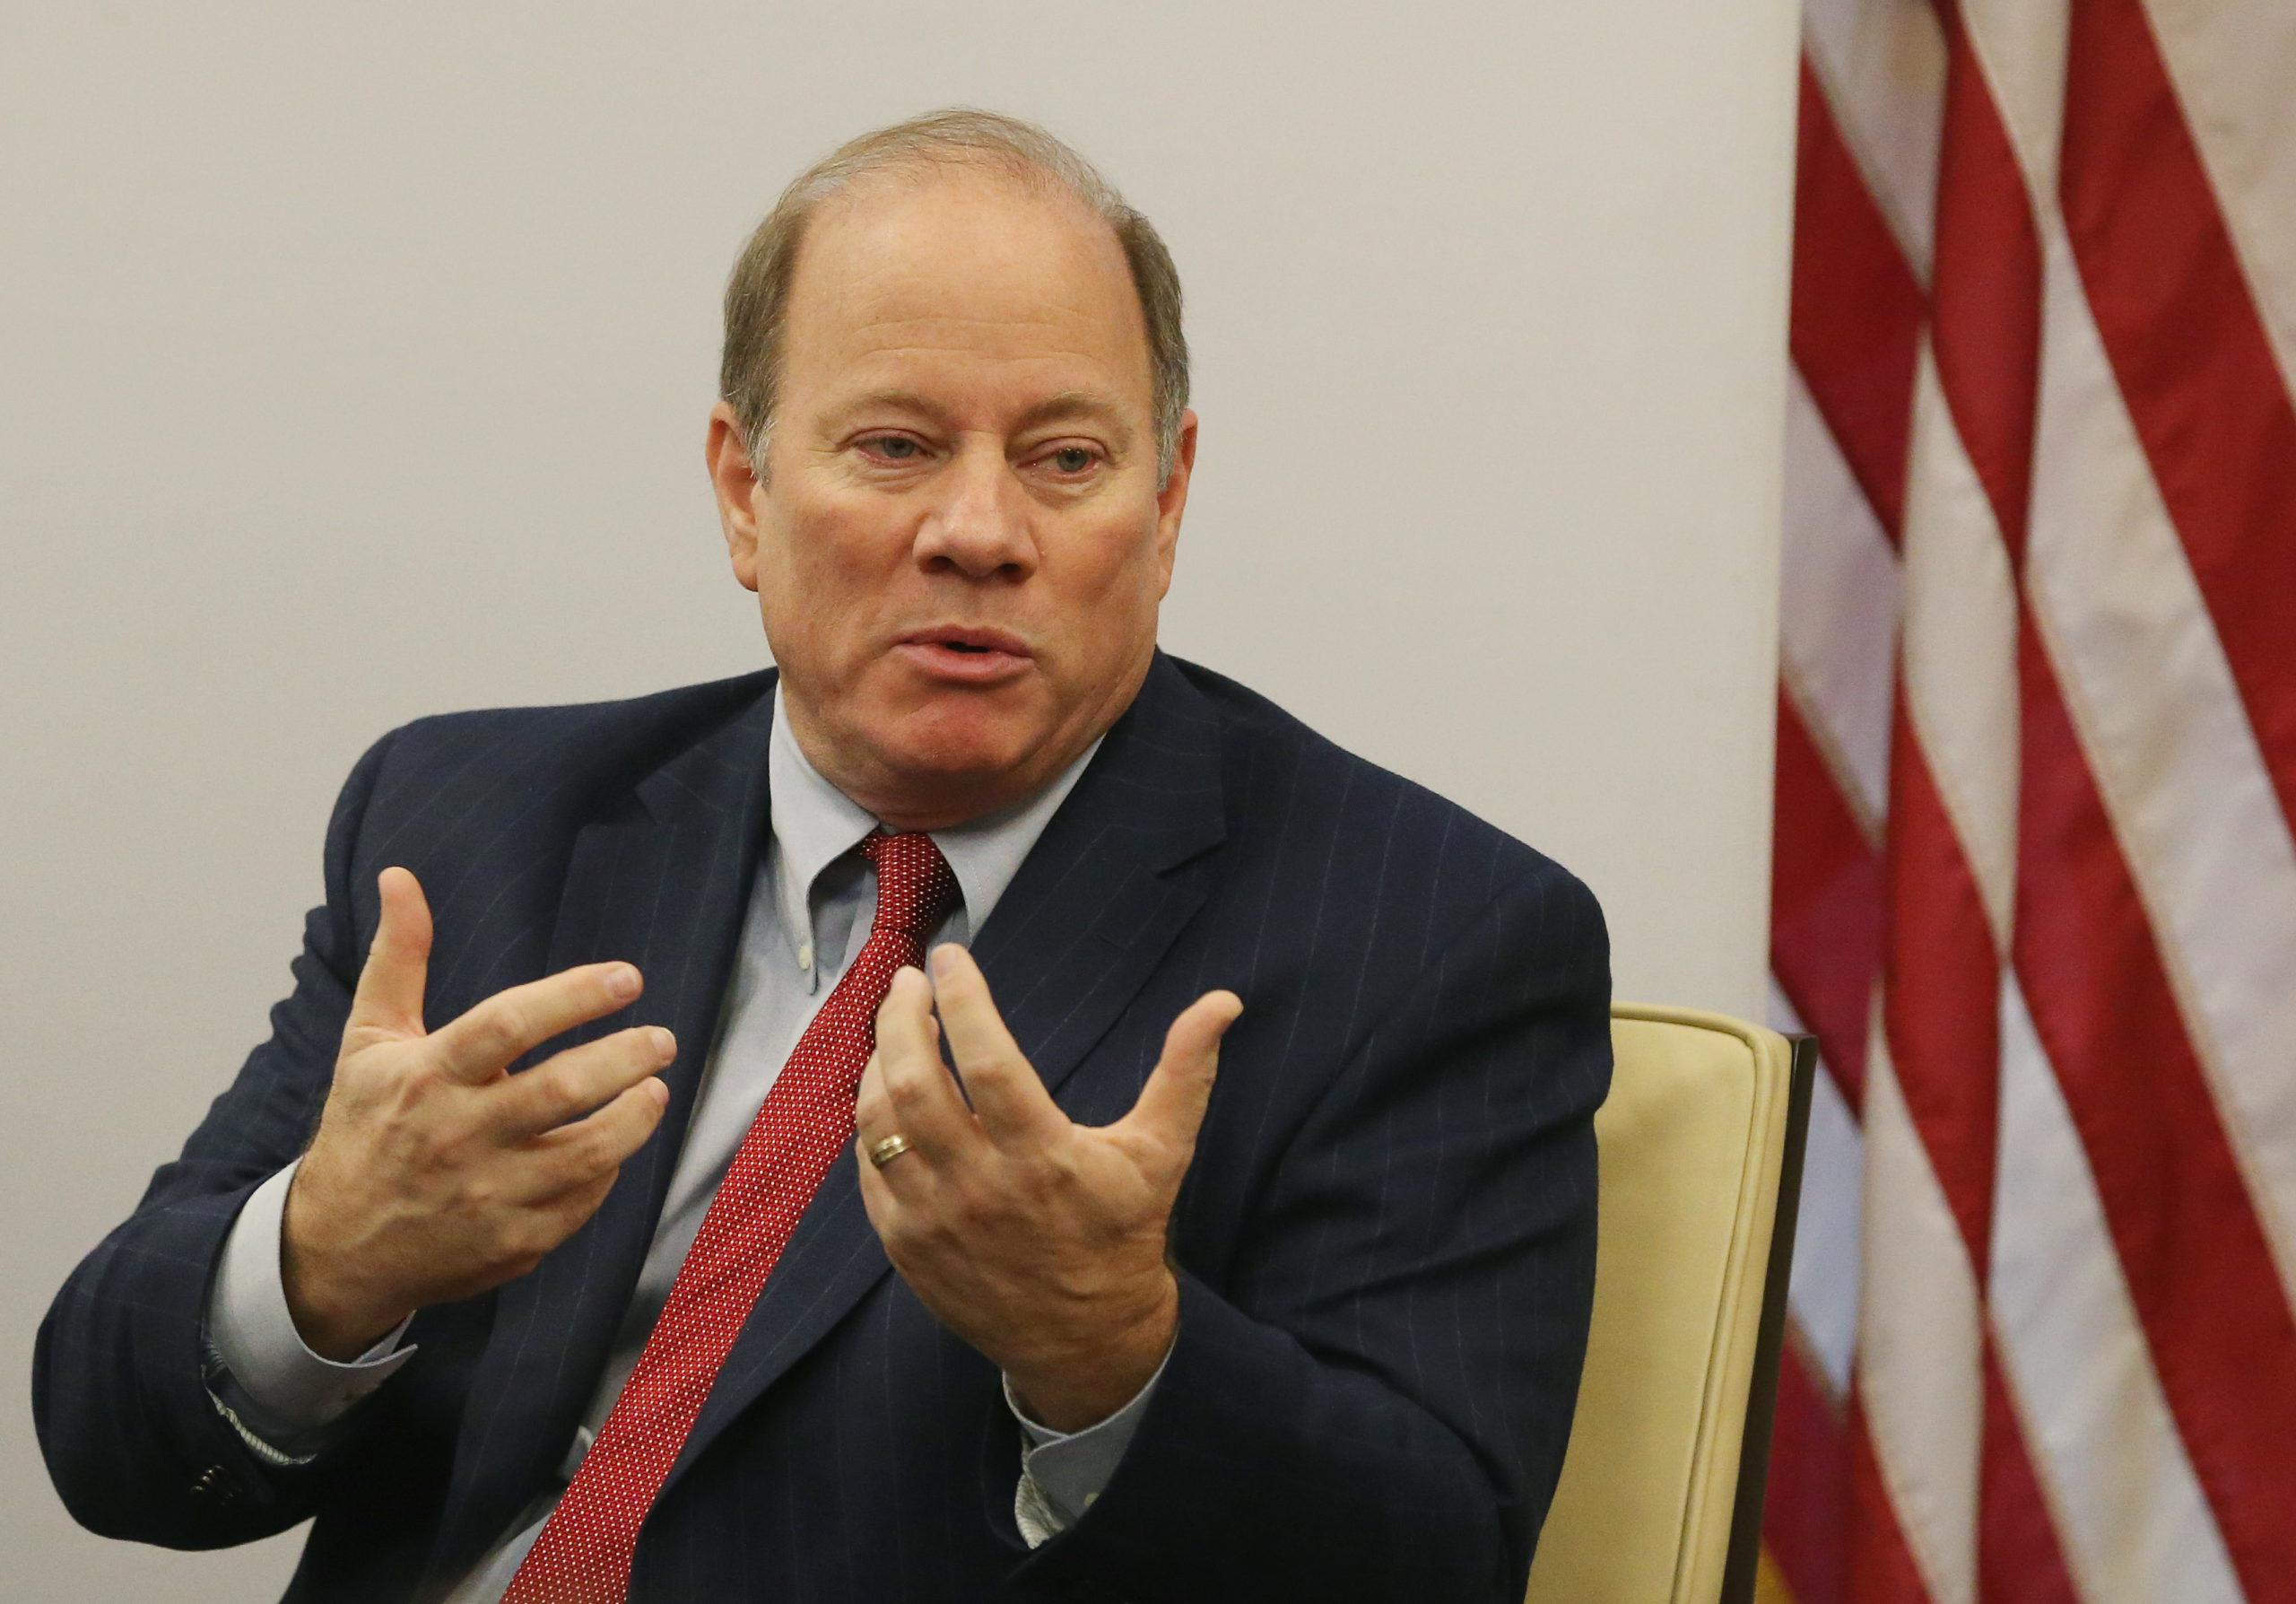 Mayor Mike Duggan promised universal free pre-K for Detroit 4-year-olds by this fall. Does he have a path through the GOP-led legislature?